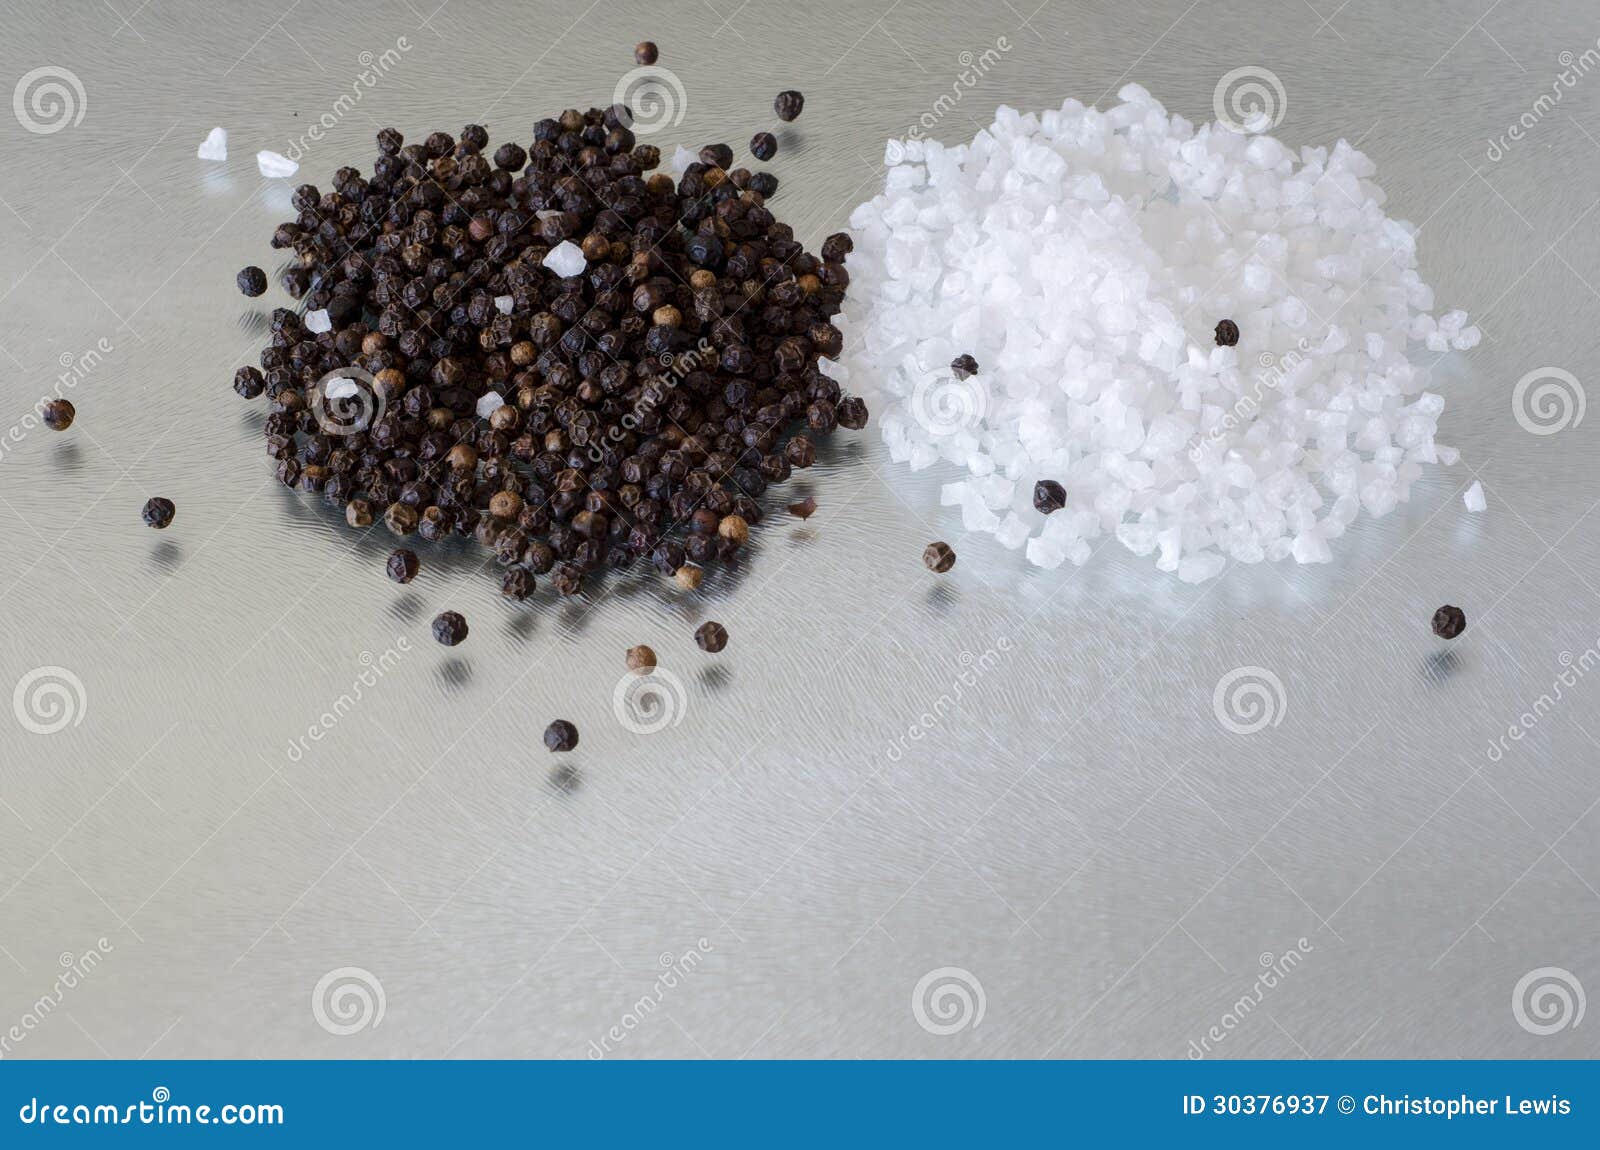 a small heap of seasalt and peppercorns on reflective surface